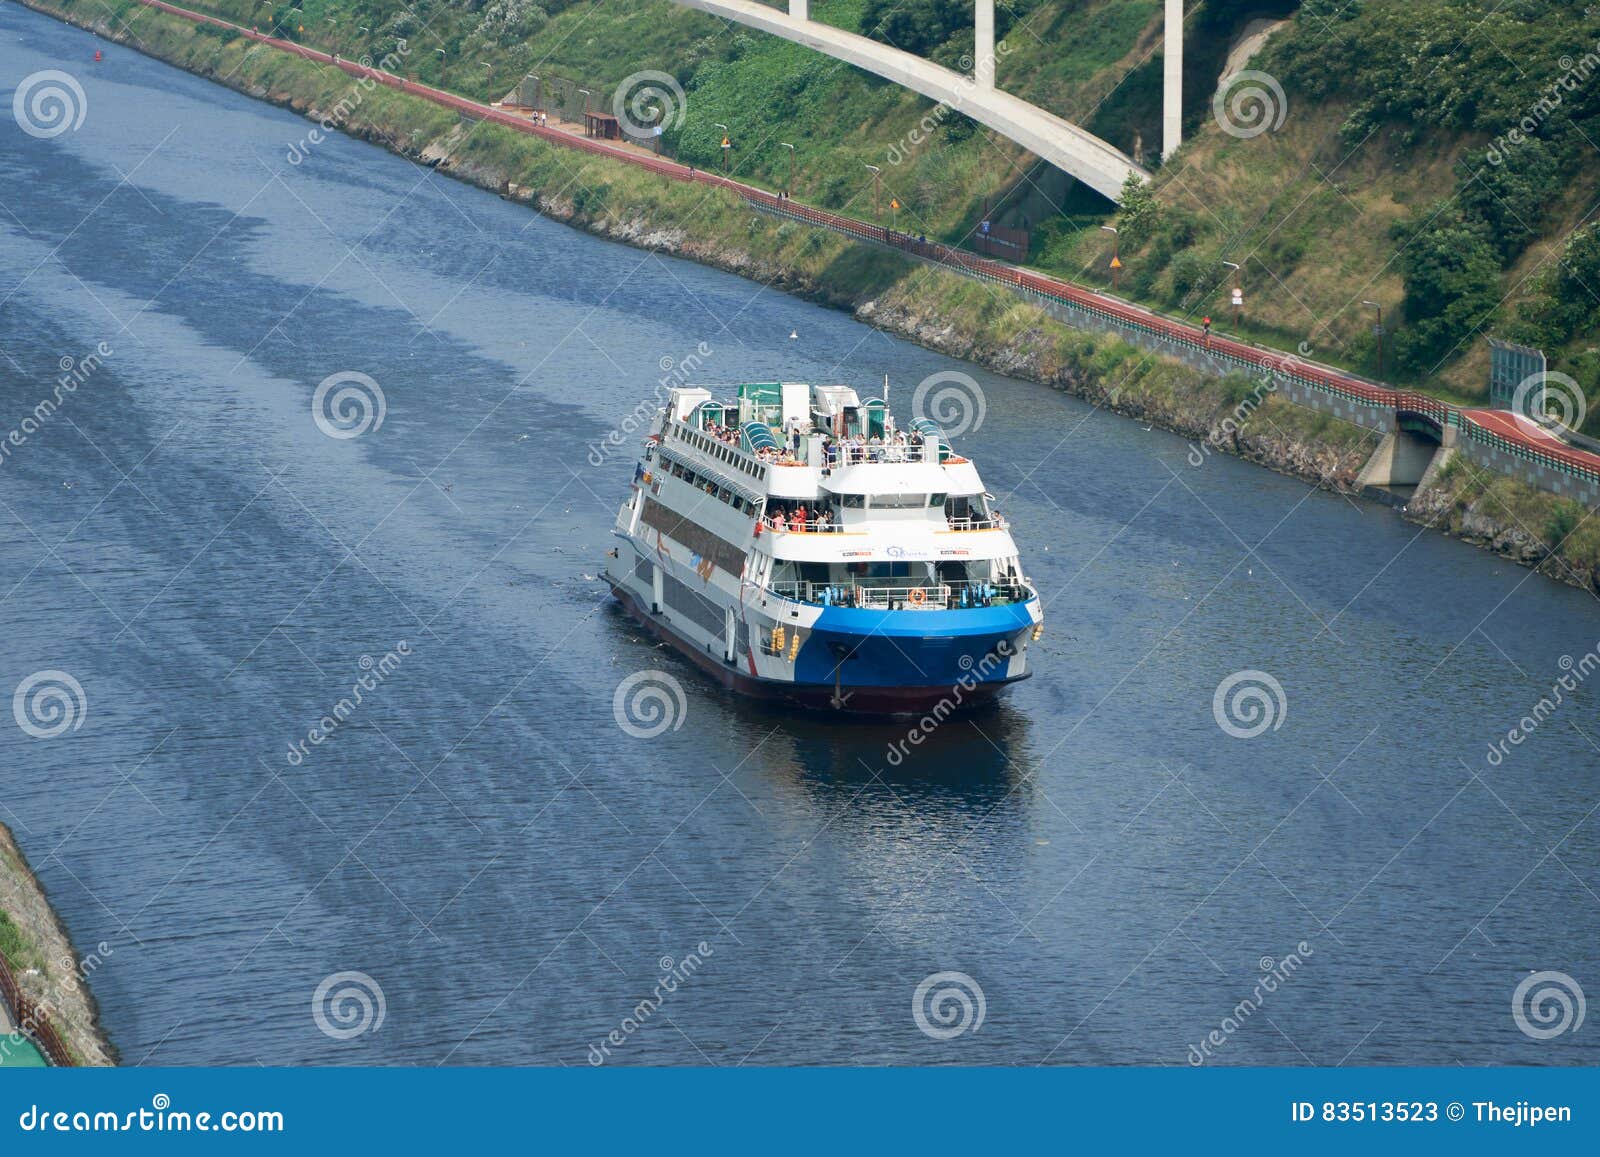 Cruise on Waterway Editorial Stock Photo - Image of passenger, canal: 83513523